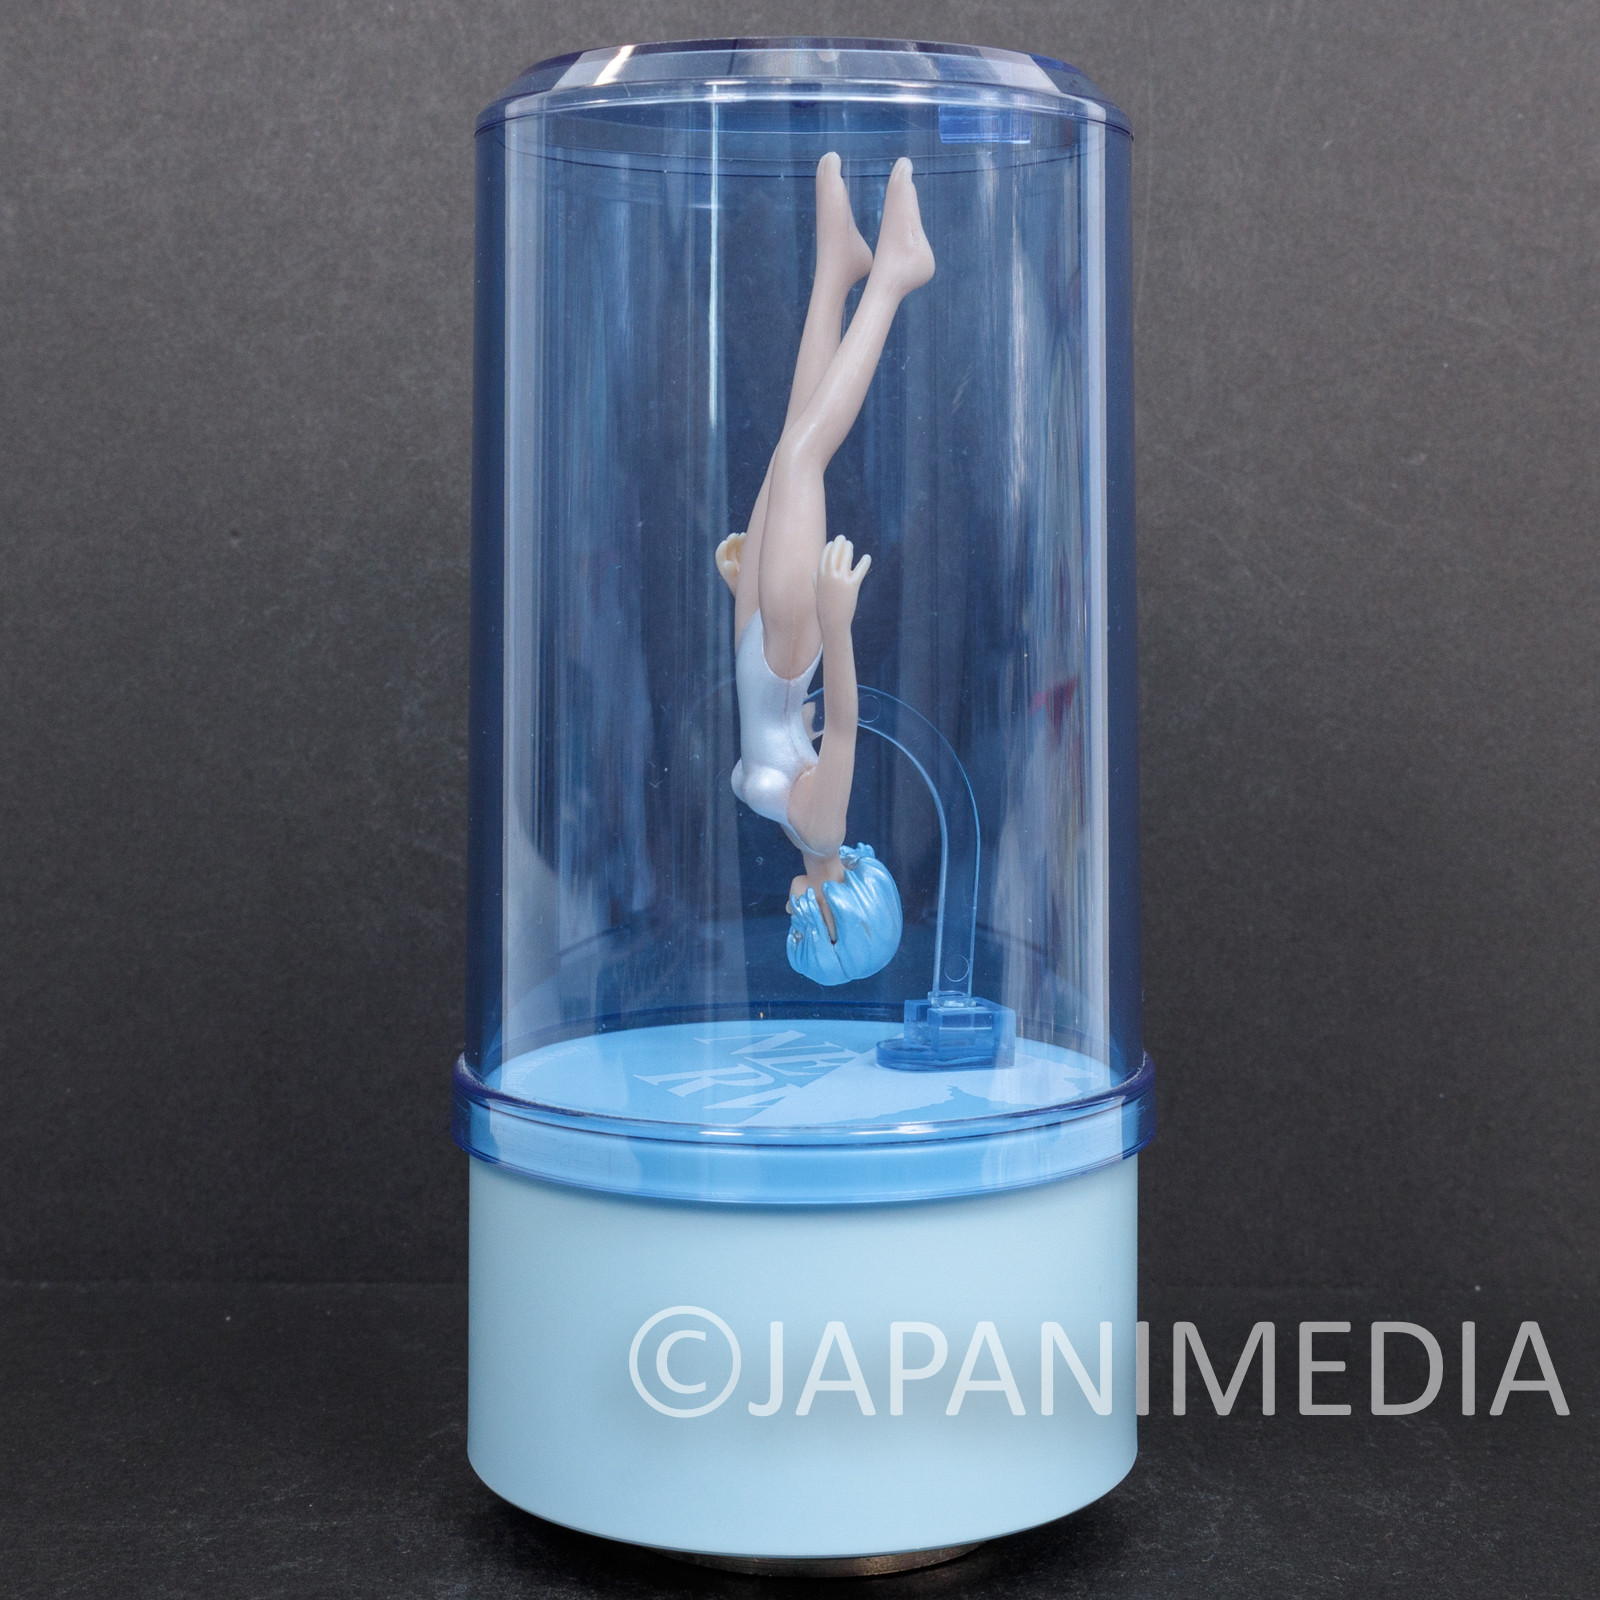 Evangelion Rei Ayanami Swimsuits Figure Music Box "Fly Me to The Moon" SEGA JAPAN